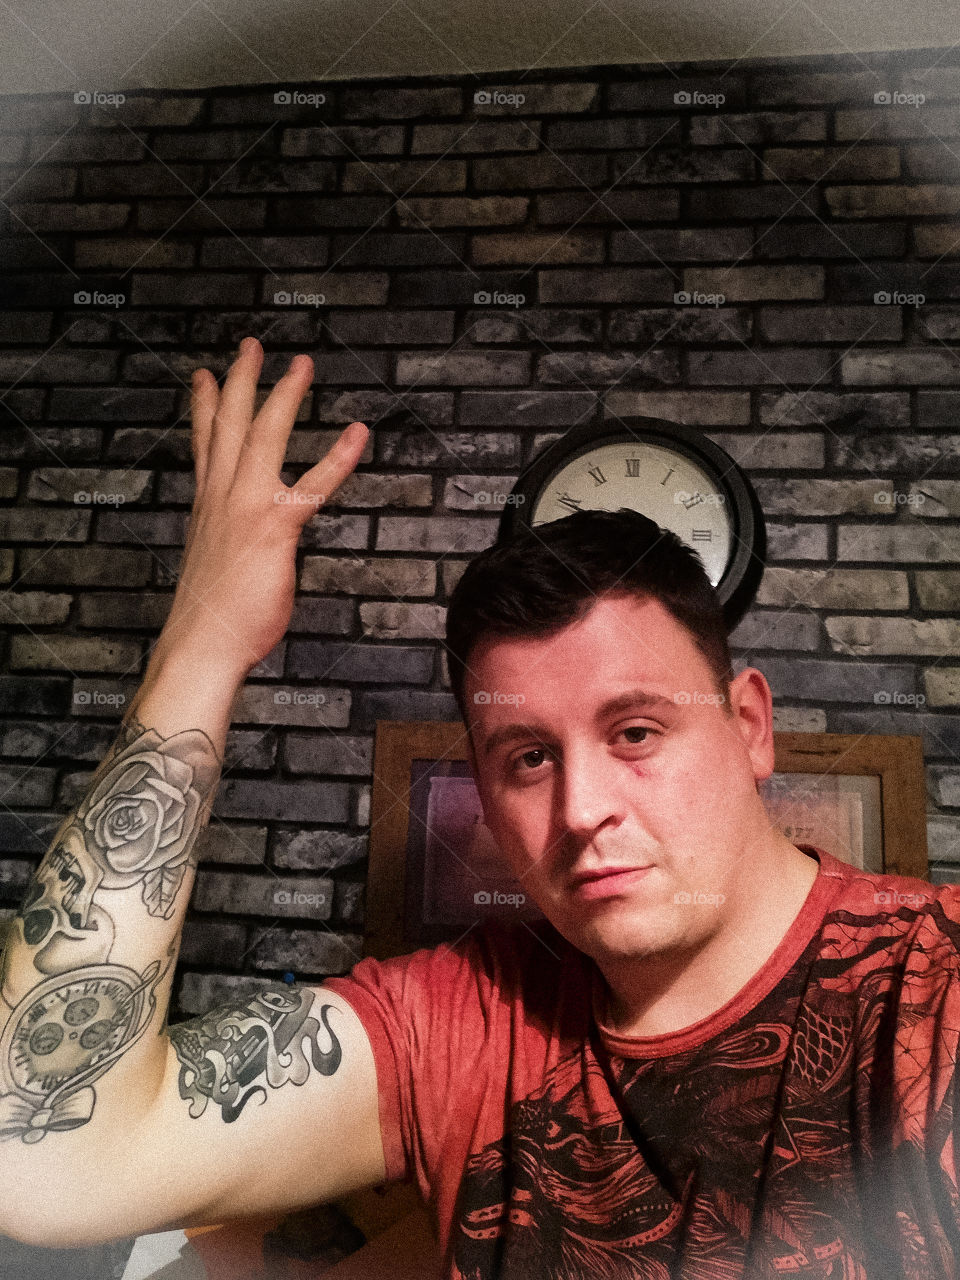 I've taken a photo of myself standing in front of a wall with a clock behind me showing off some of my tattoos I have acquired over the last couple of years